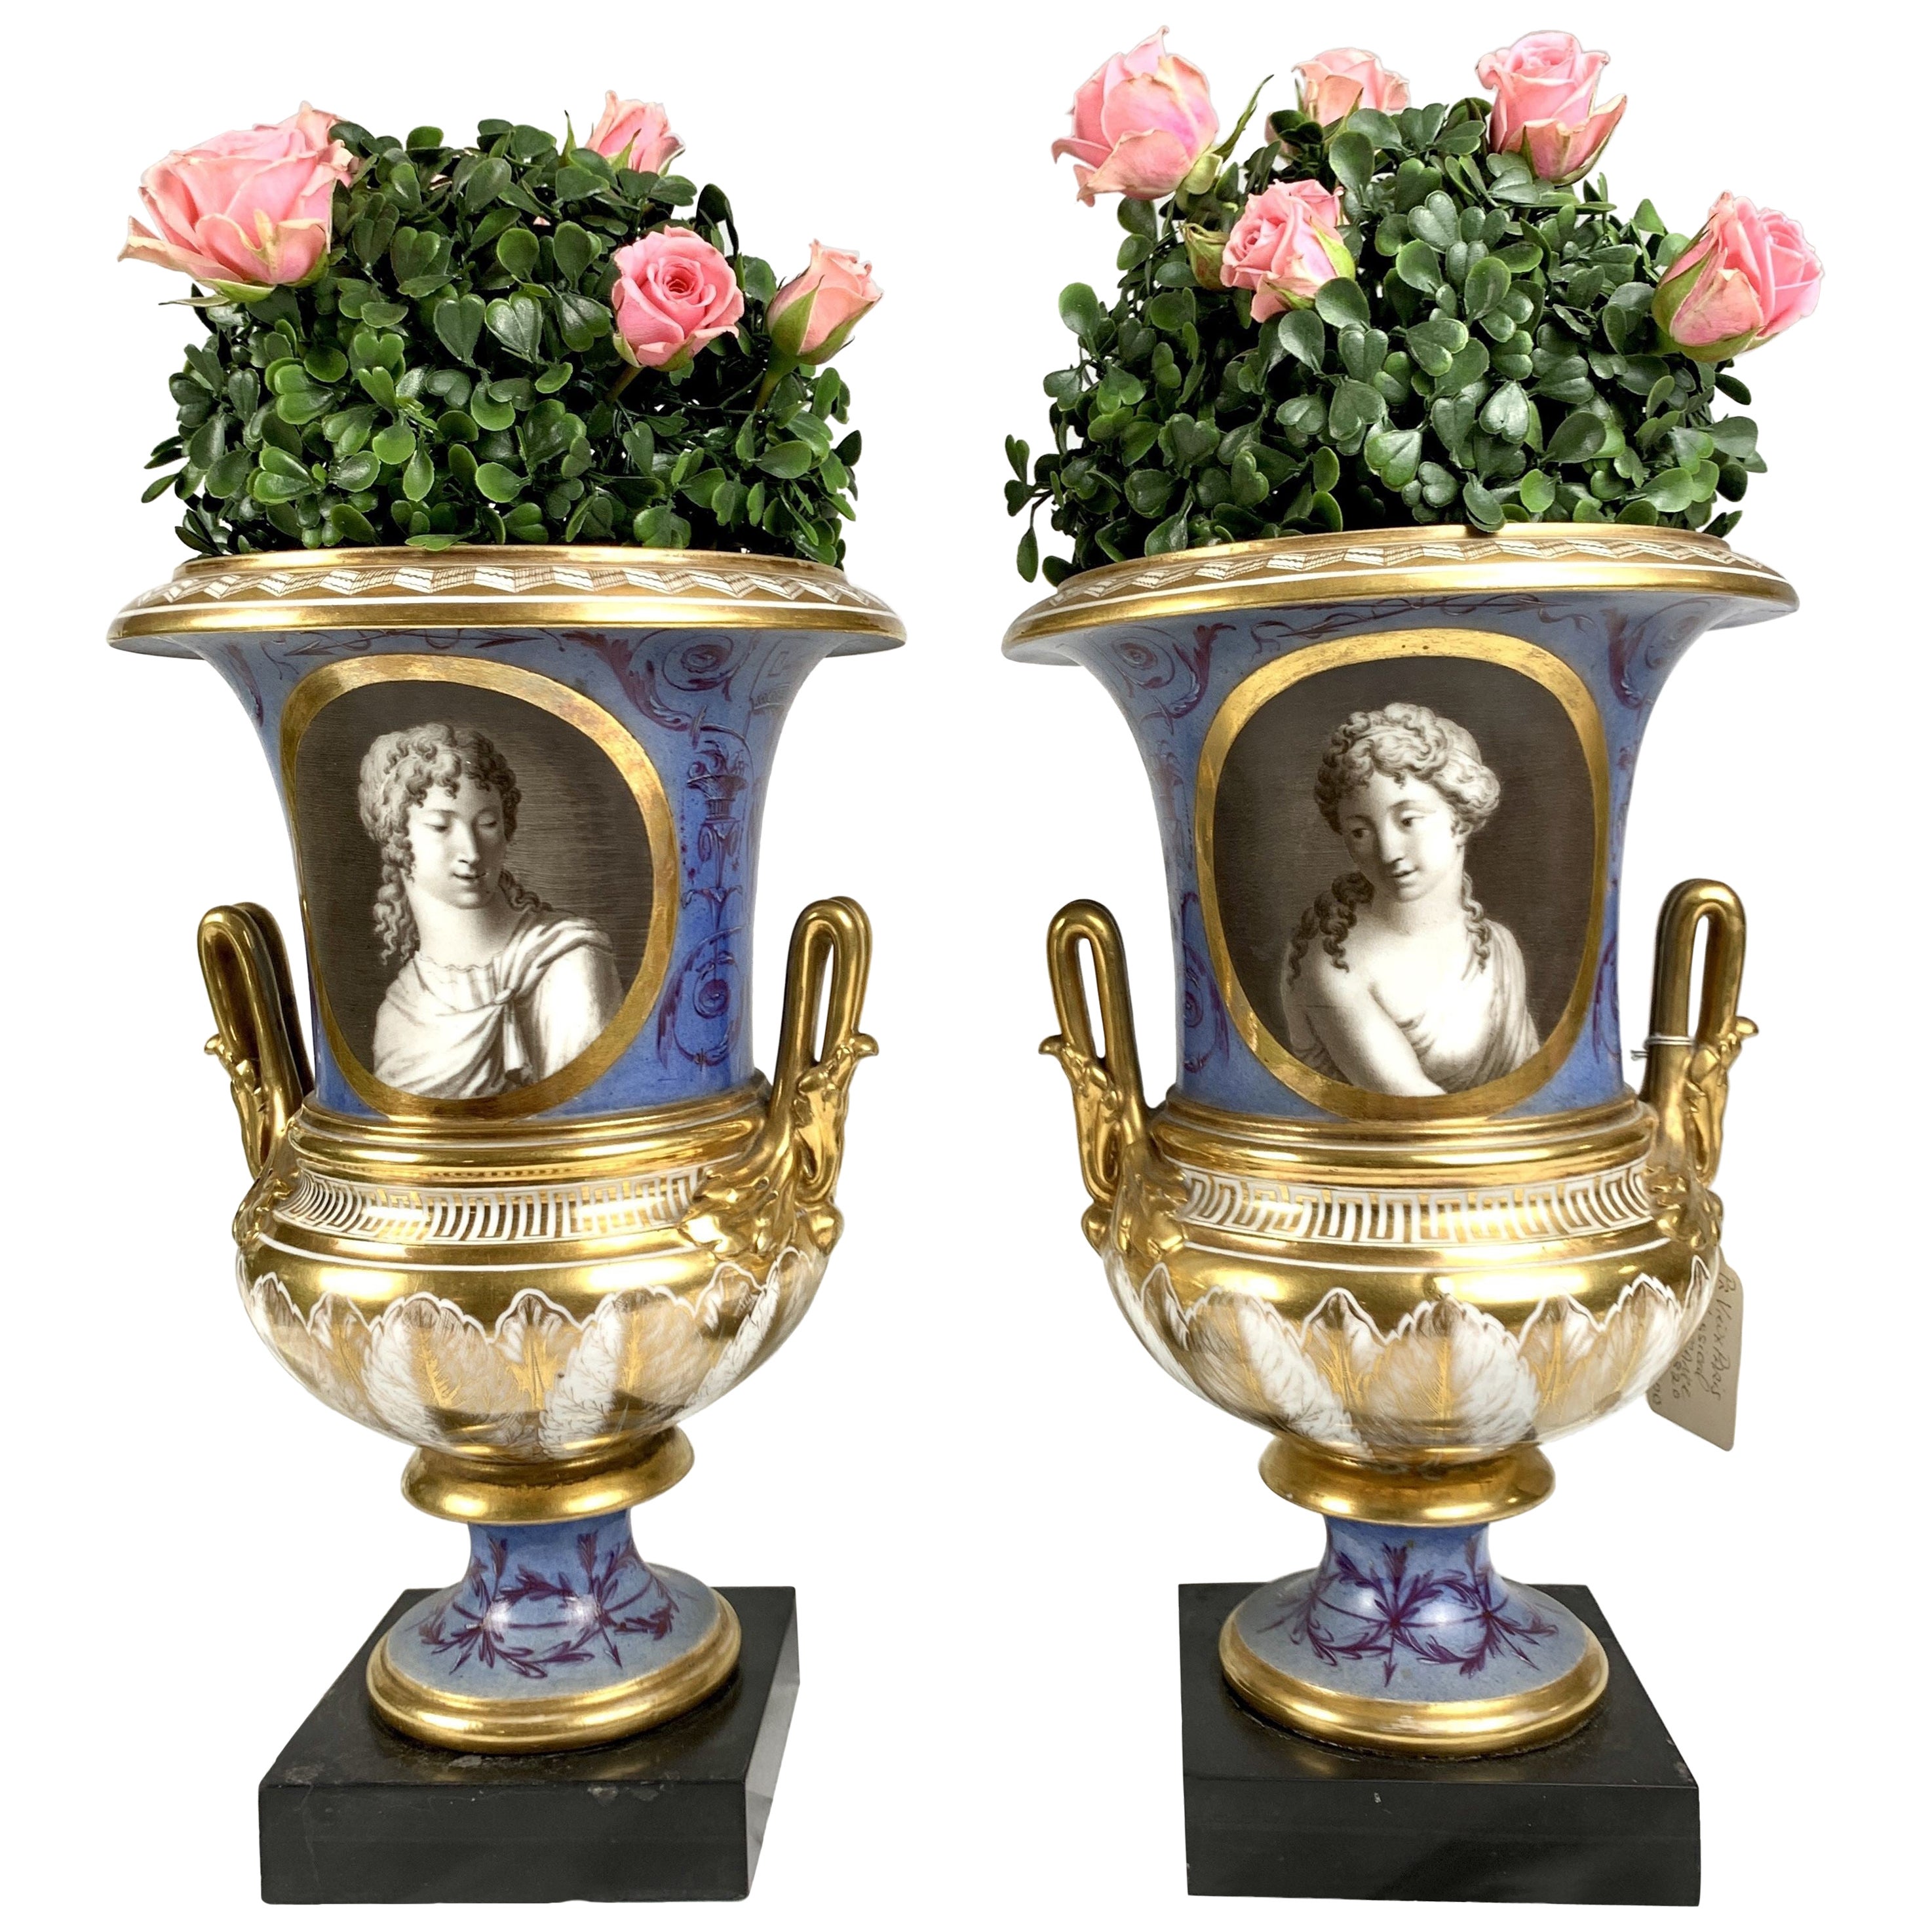 Pair Hand-Painted Vases with Portraits of Roman Figures France Circa 1820